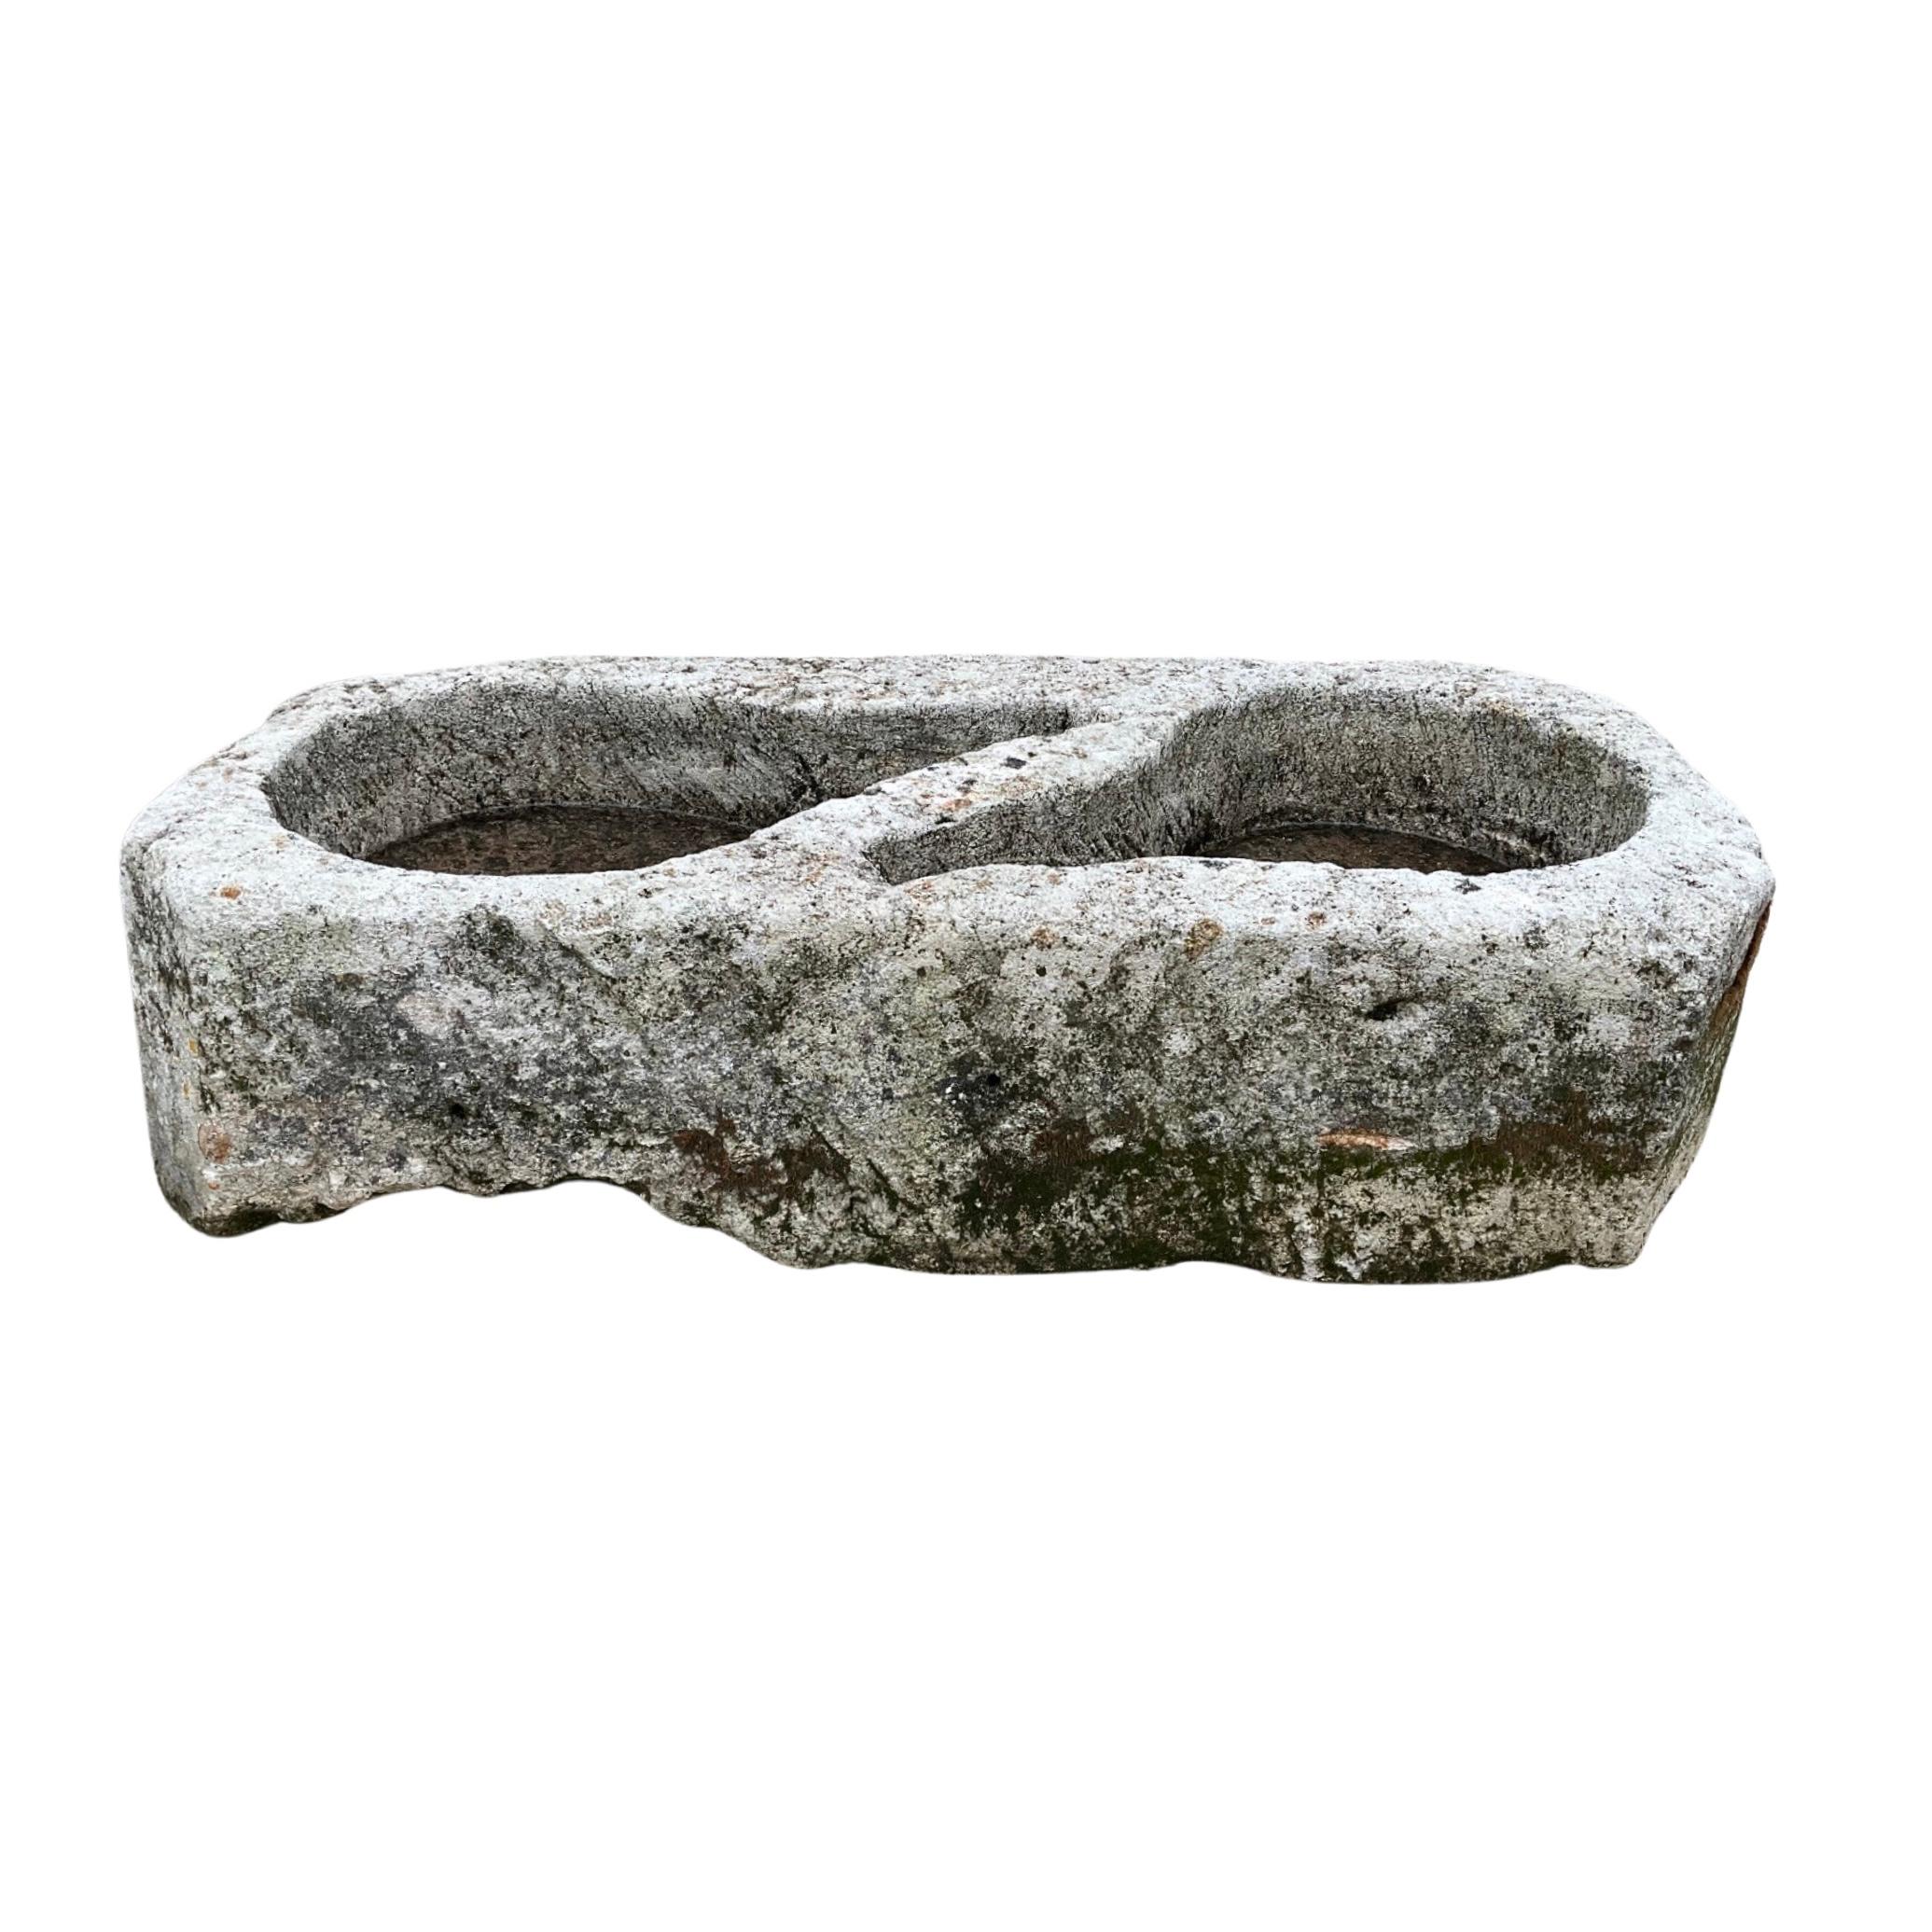 Enhance your home with our French Limestone Ham Trough. Over 300 years old, this 17th-century trough includes two basins and a rich history. Originally used to cure and season ham in France, it now serves as a durable planter or small birdbath.